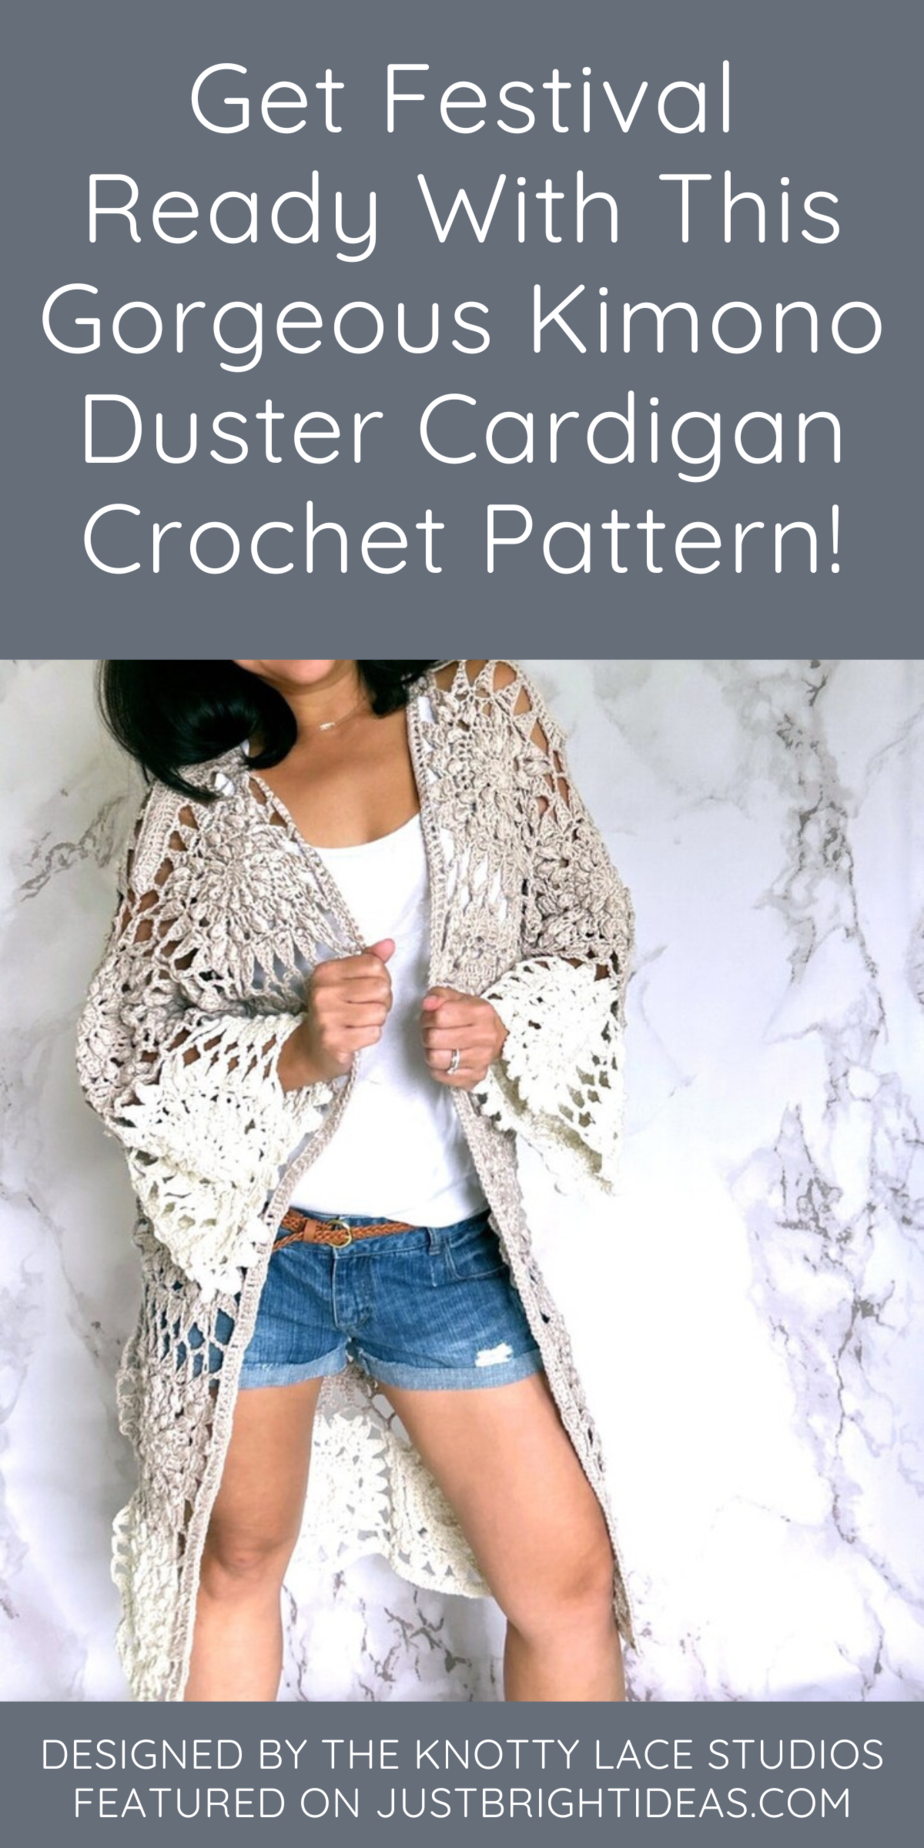 Get festival ready with this gorgeous kimono duster cardigan free crochet pattern